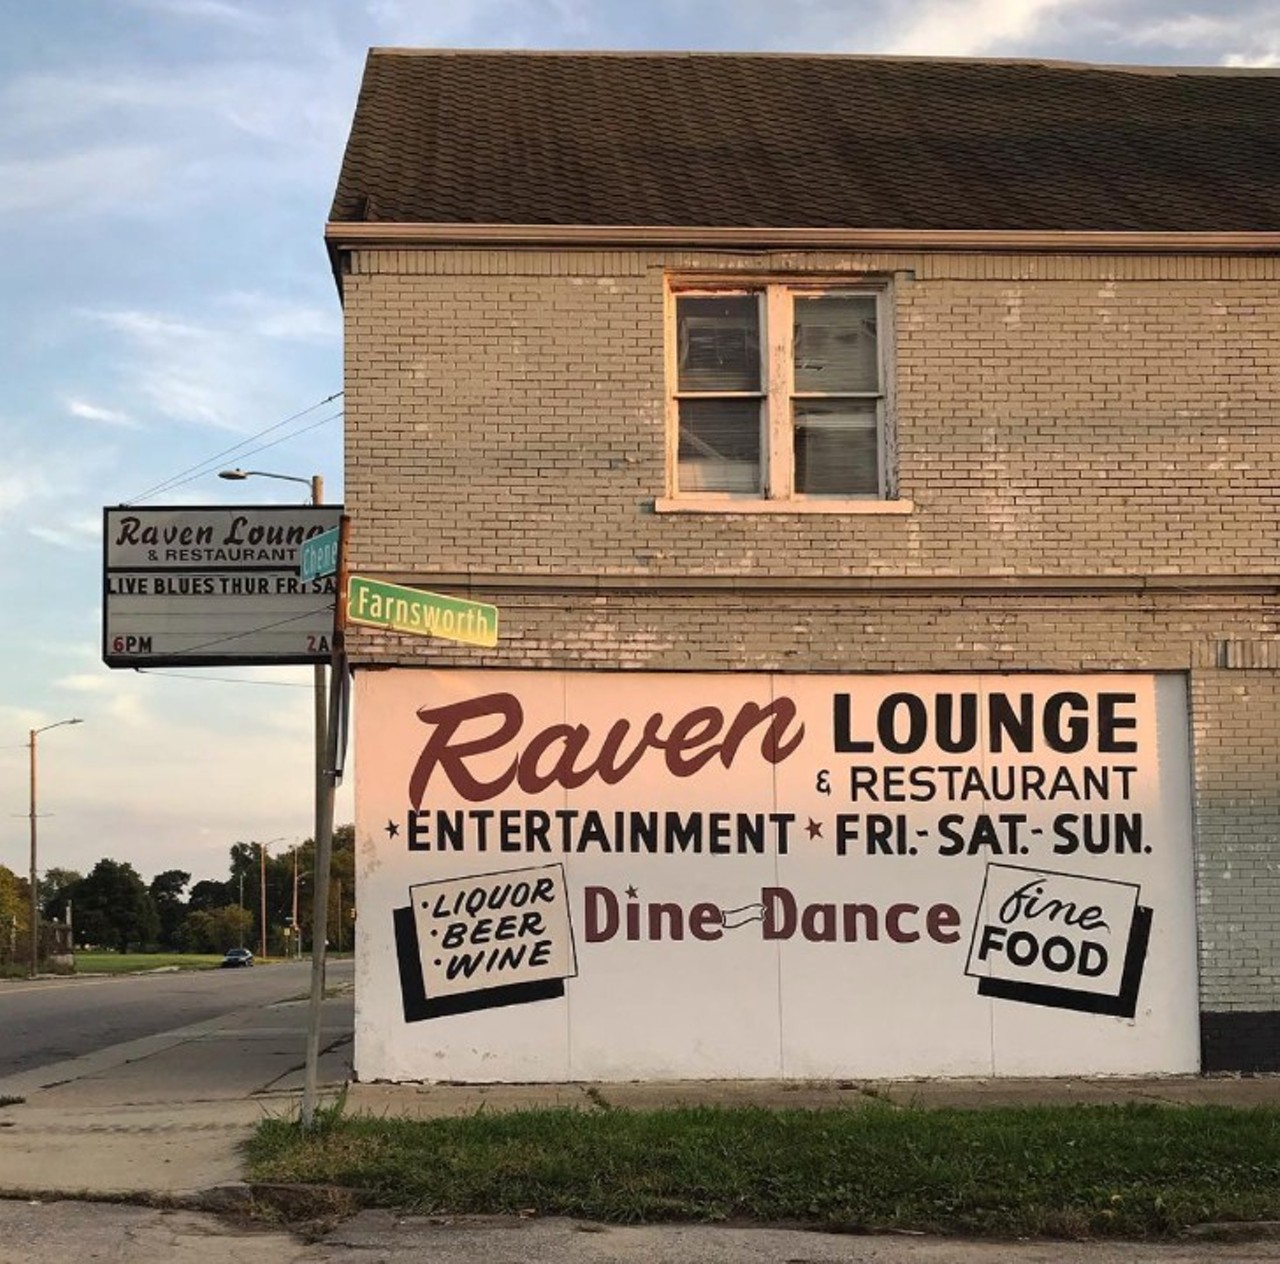 The Raven Lounge
5145 Chene St, Detroit, MI 48221
Known as &#147;Detroit&#146;s House of Blues,&#148; the Raven Lounge has live entertainment Thursday - Saturday for only a $5 cover charge. 
Photo with permission from @emilyanomaly